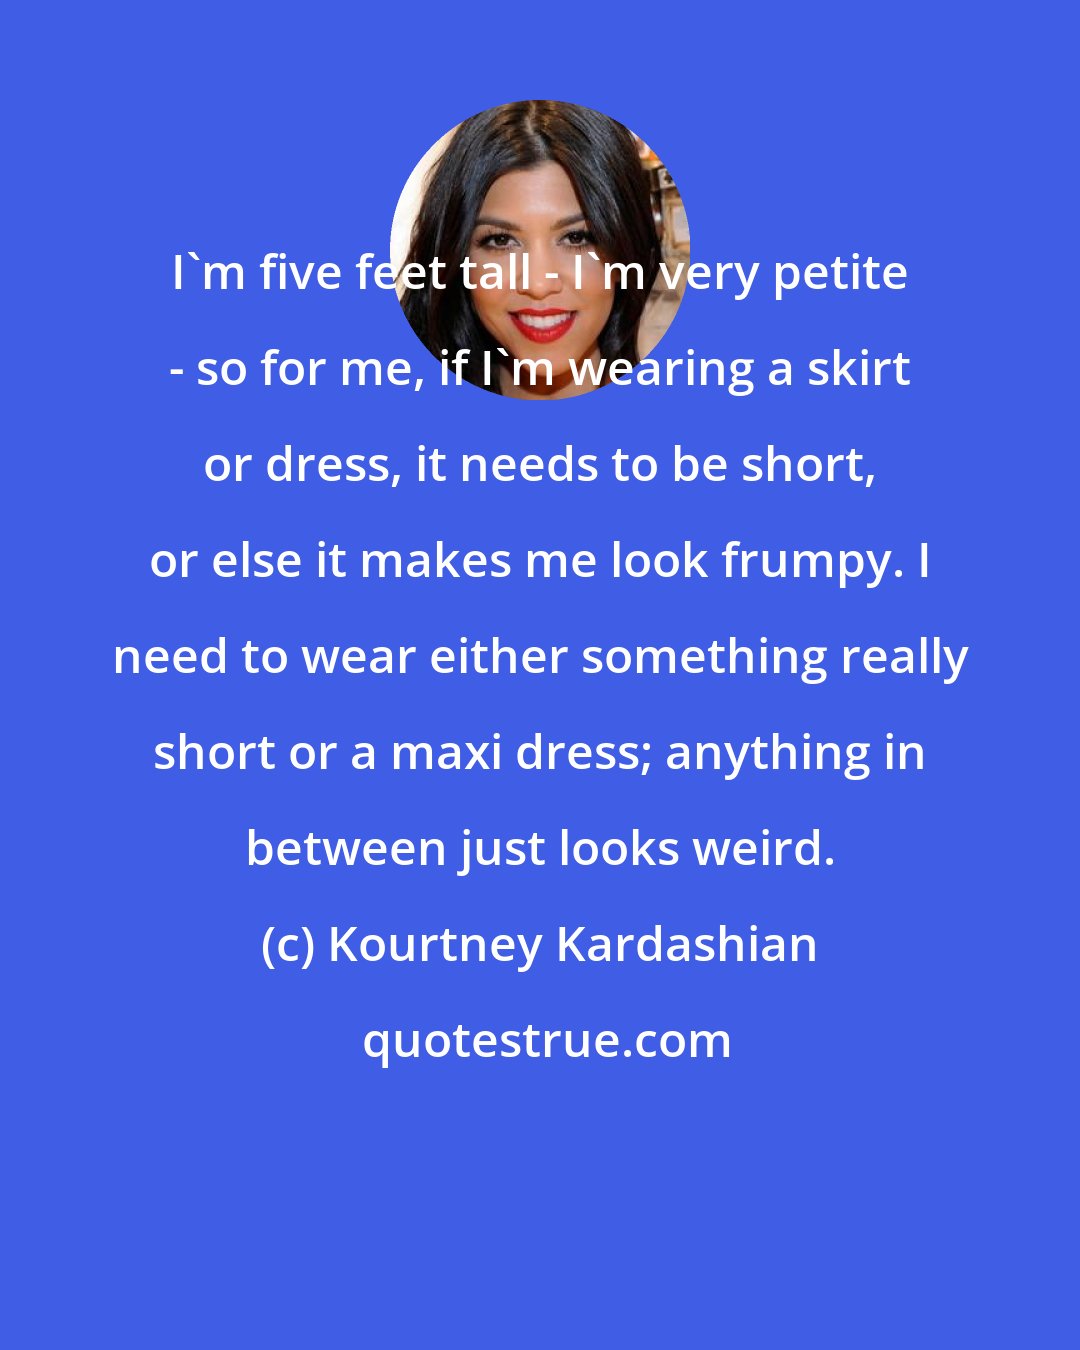 Kourtney Kardashian: I'm five feet tall - I'm very petite - so for me, if I'm wearing a skirt or dress, it needs to be short, or else it makes me look frumpy. I need to wear either something really short or a maxi dress; anything in between just looks weird.